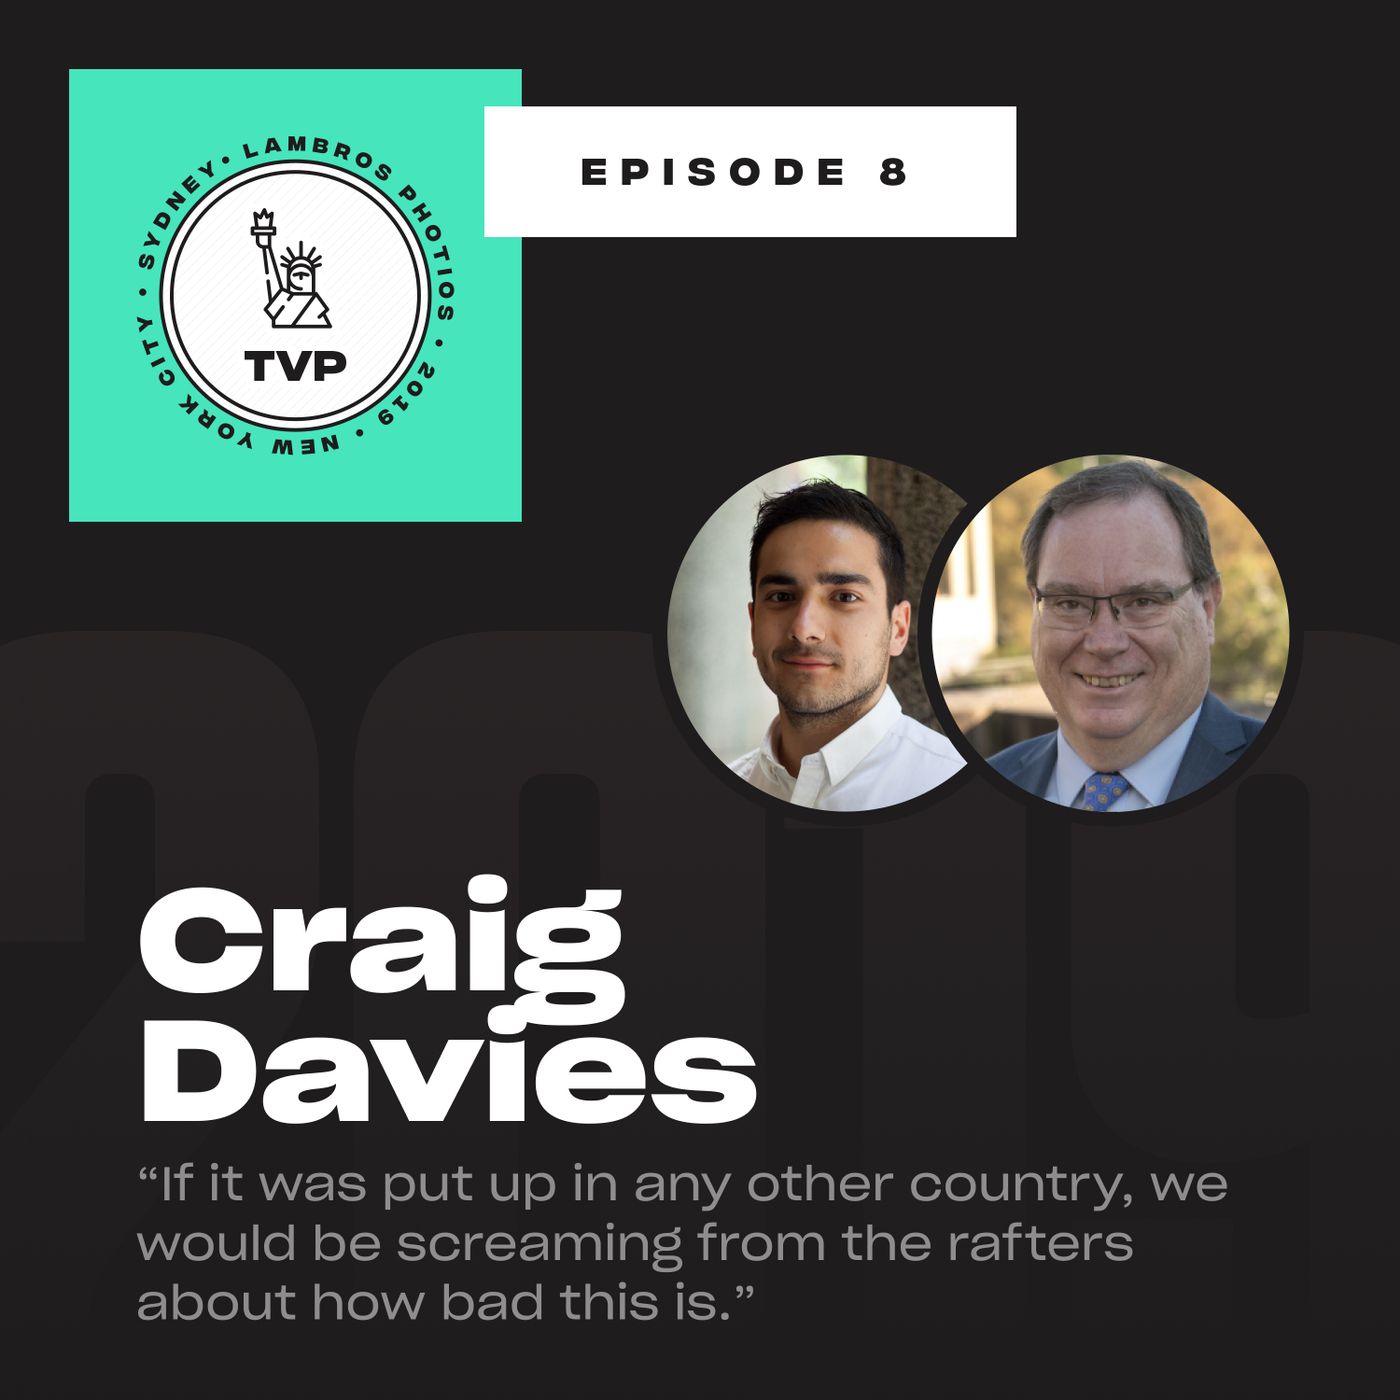 The Privacy Risk The New Encryption Laws Pose with Craig Davies